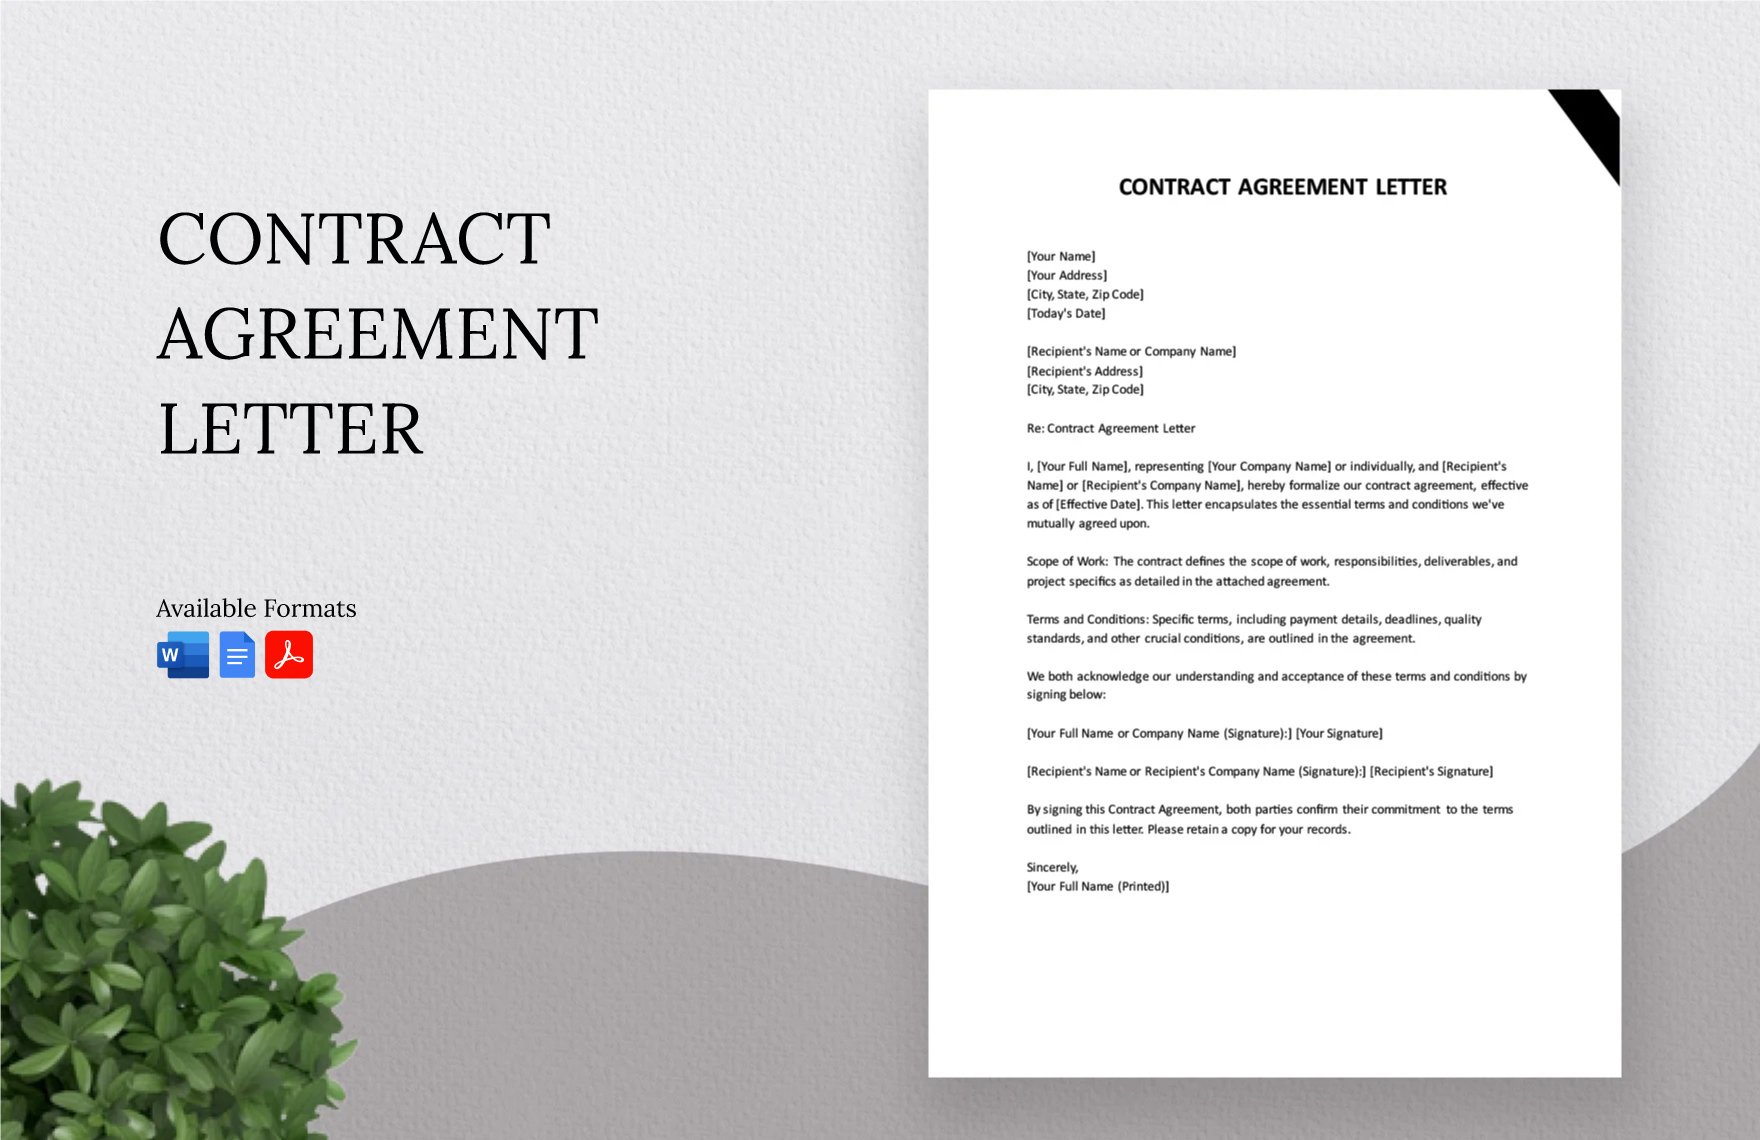 Contract Agreement Letter in Word, Google Docs, PDF